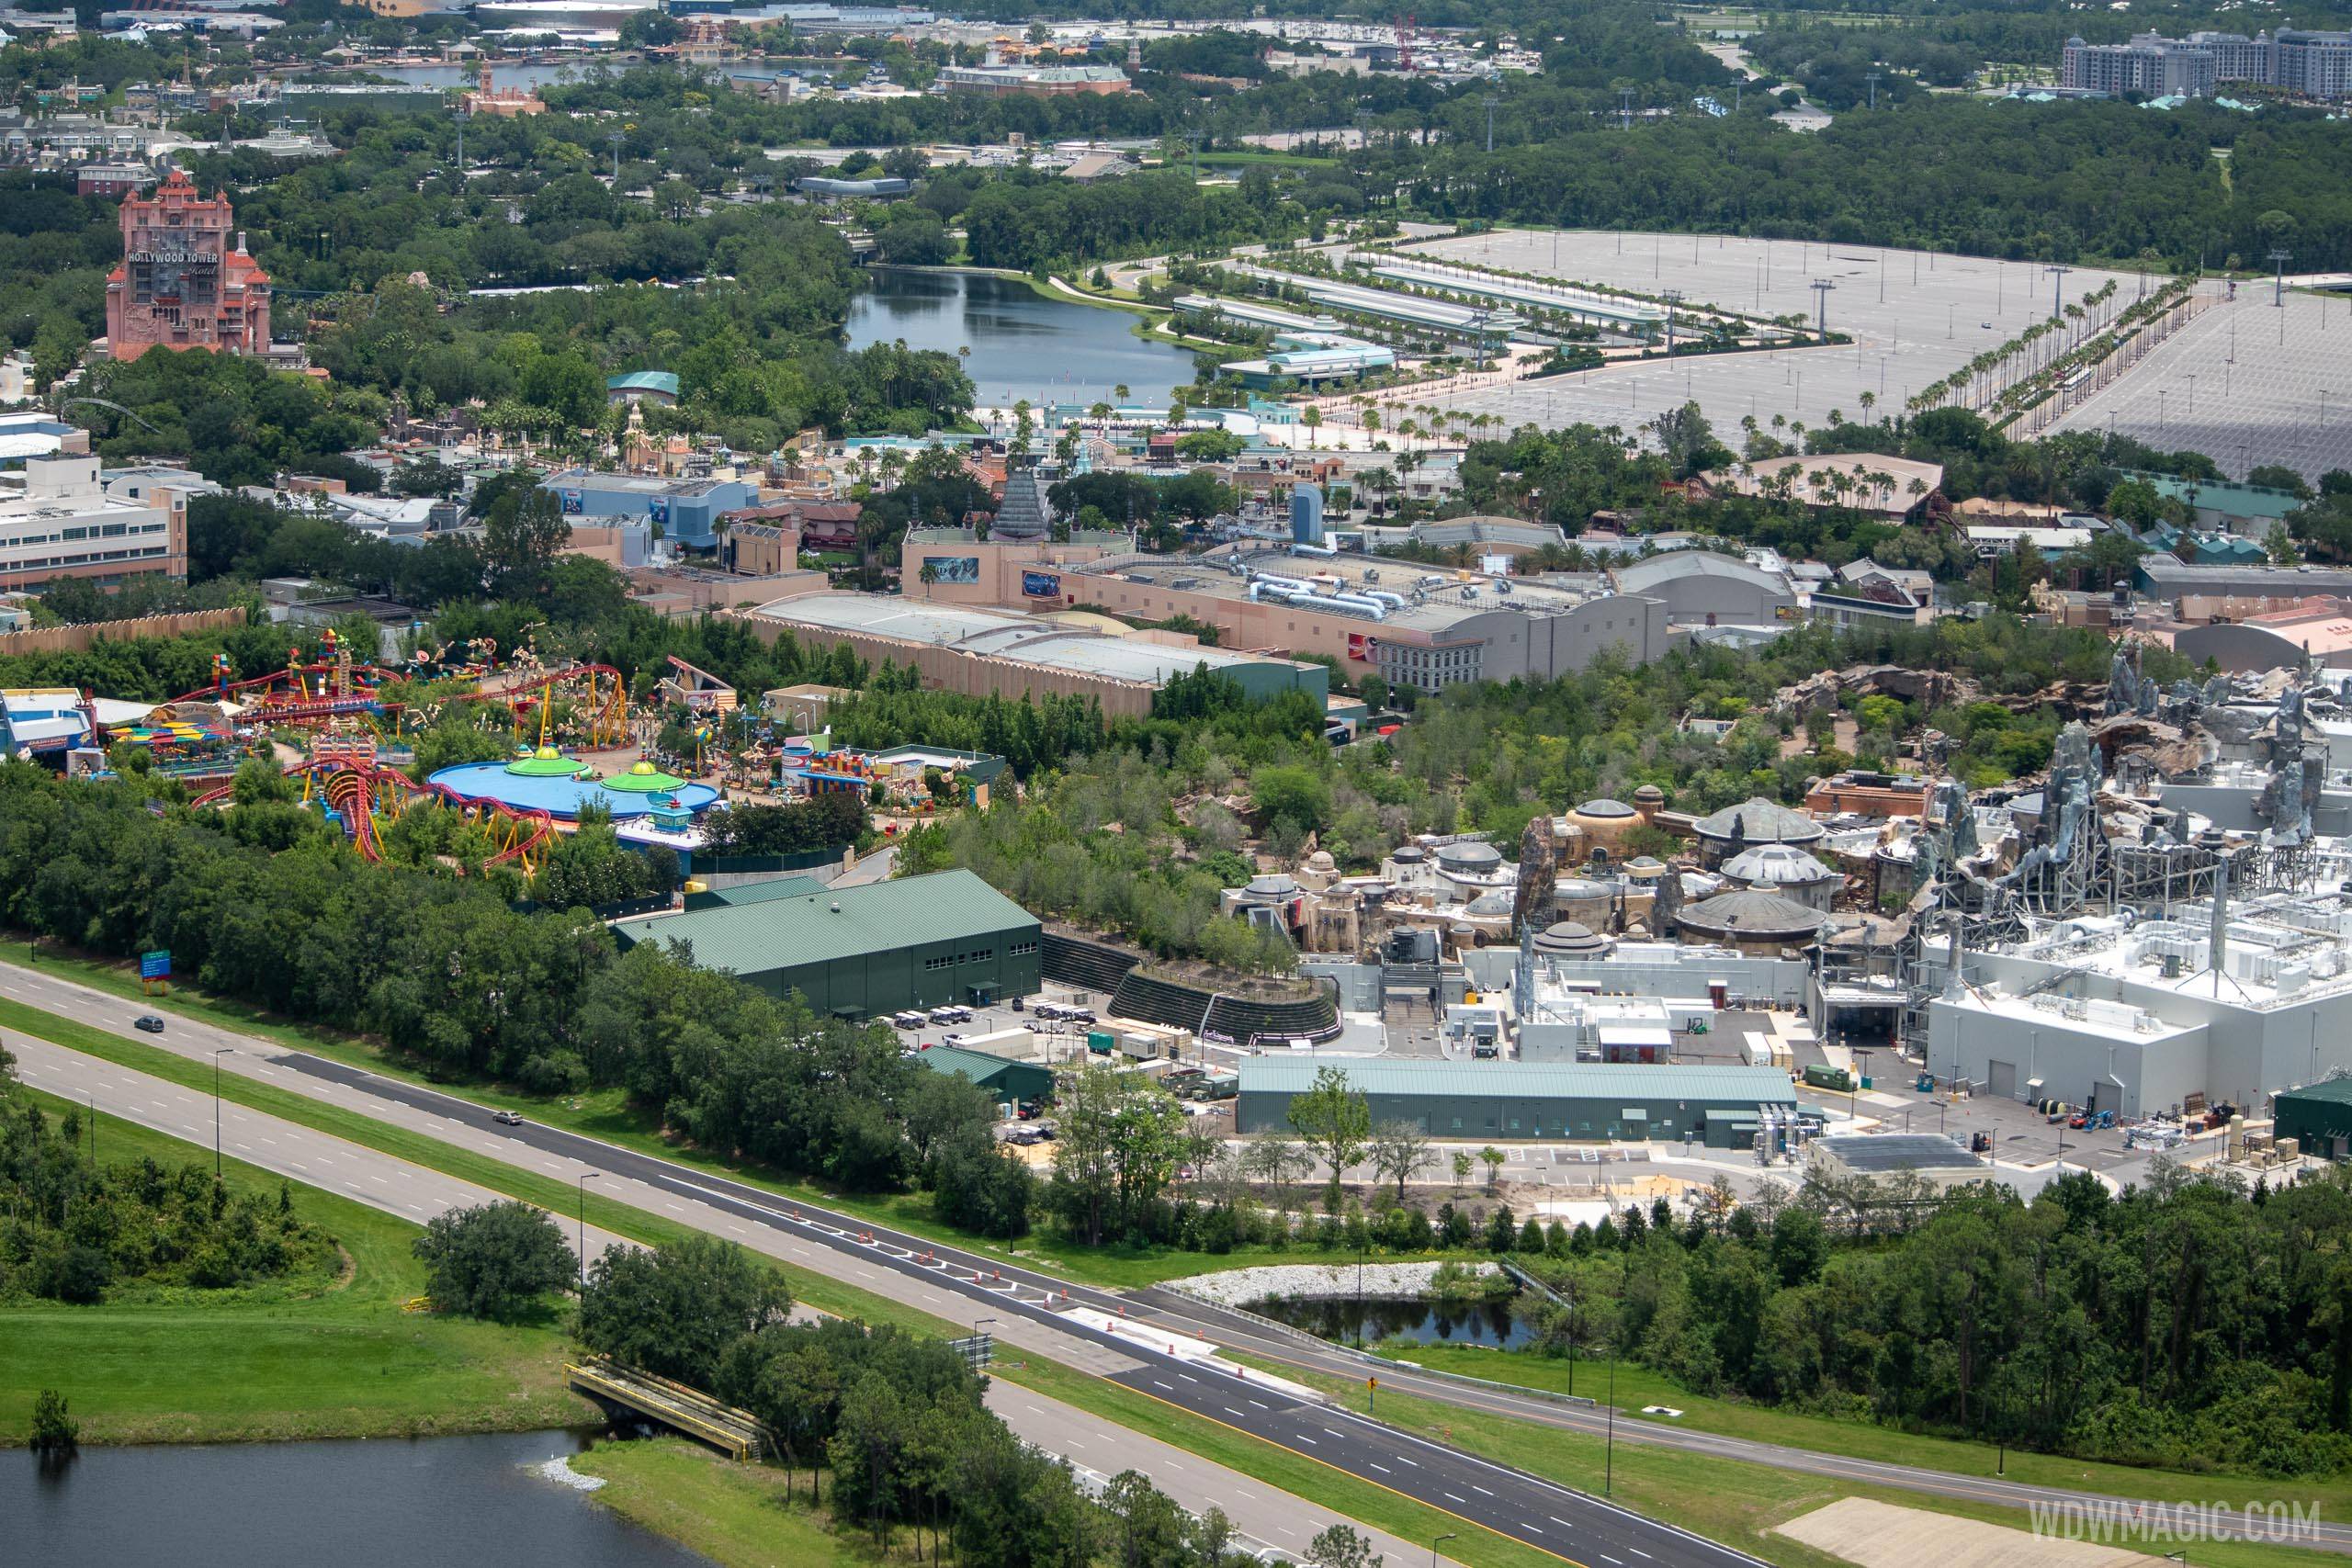 Flights directly over Disney parks are generally not allowed by FAA restrictions